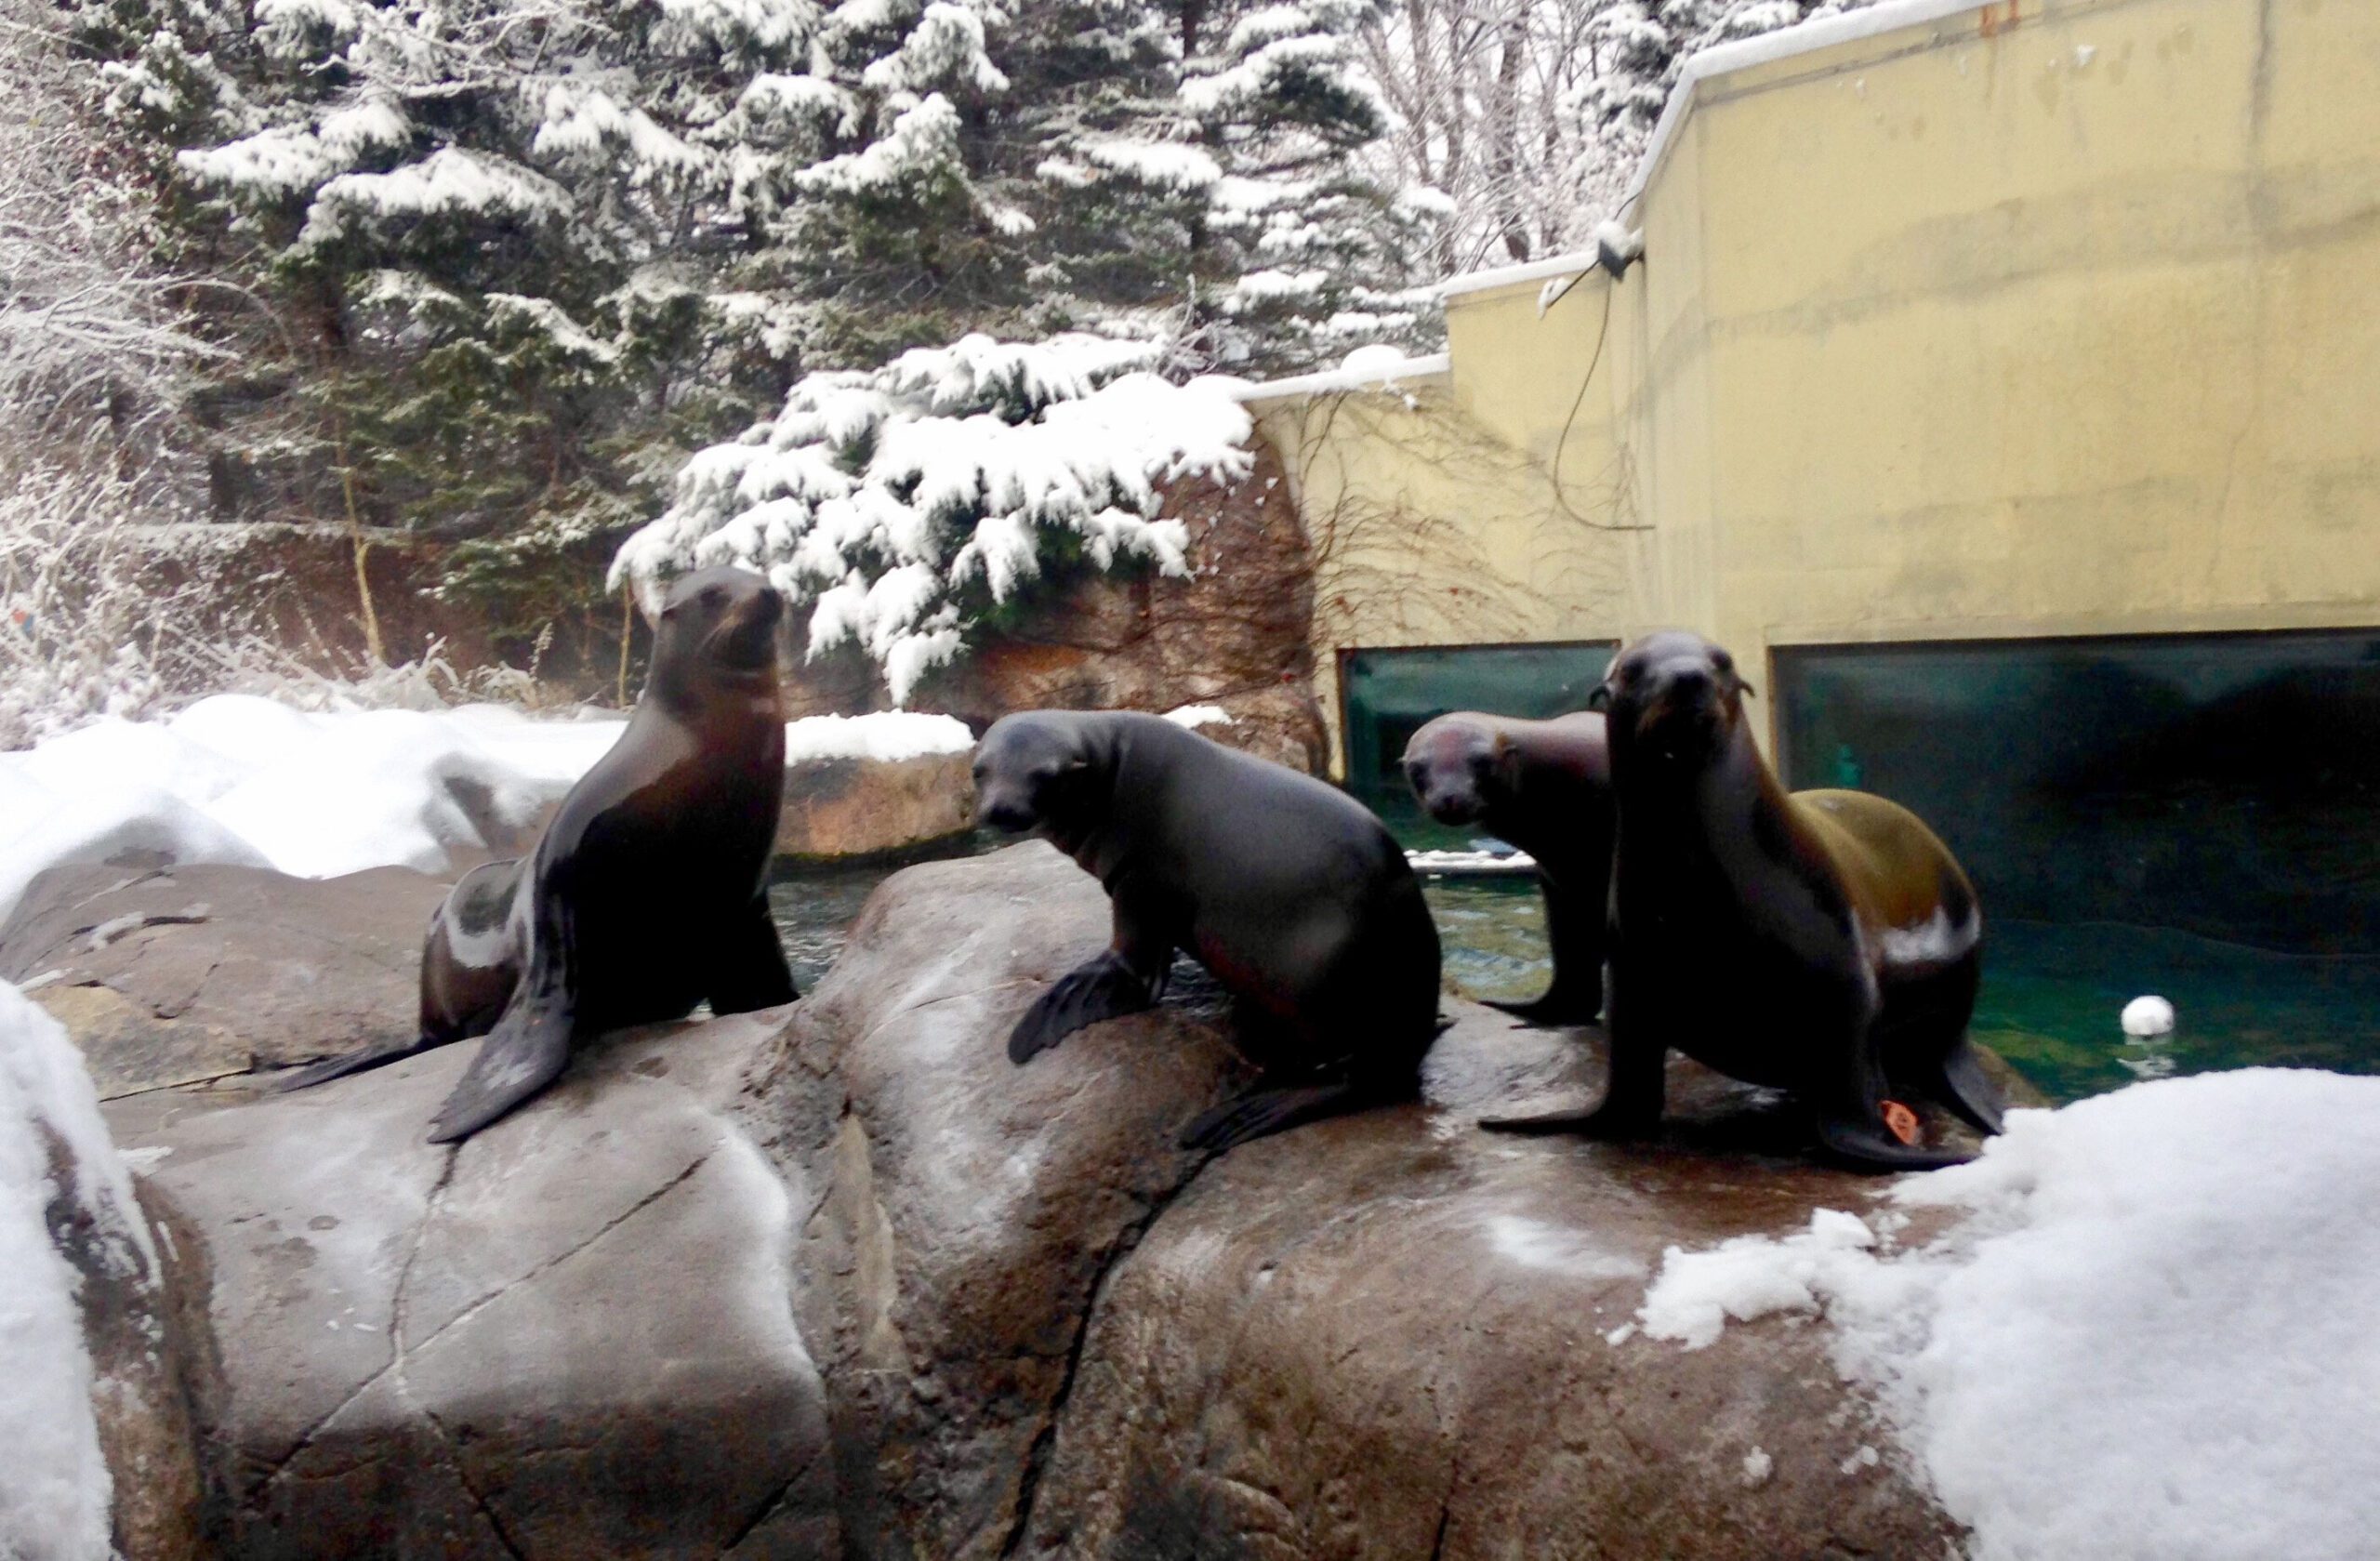 Introducing two new sea lions to the Zoo